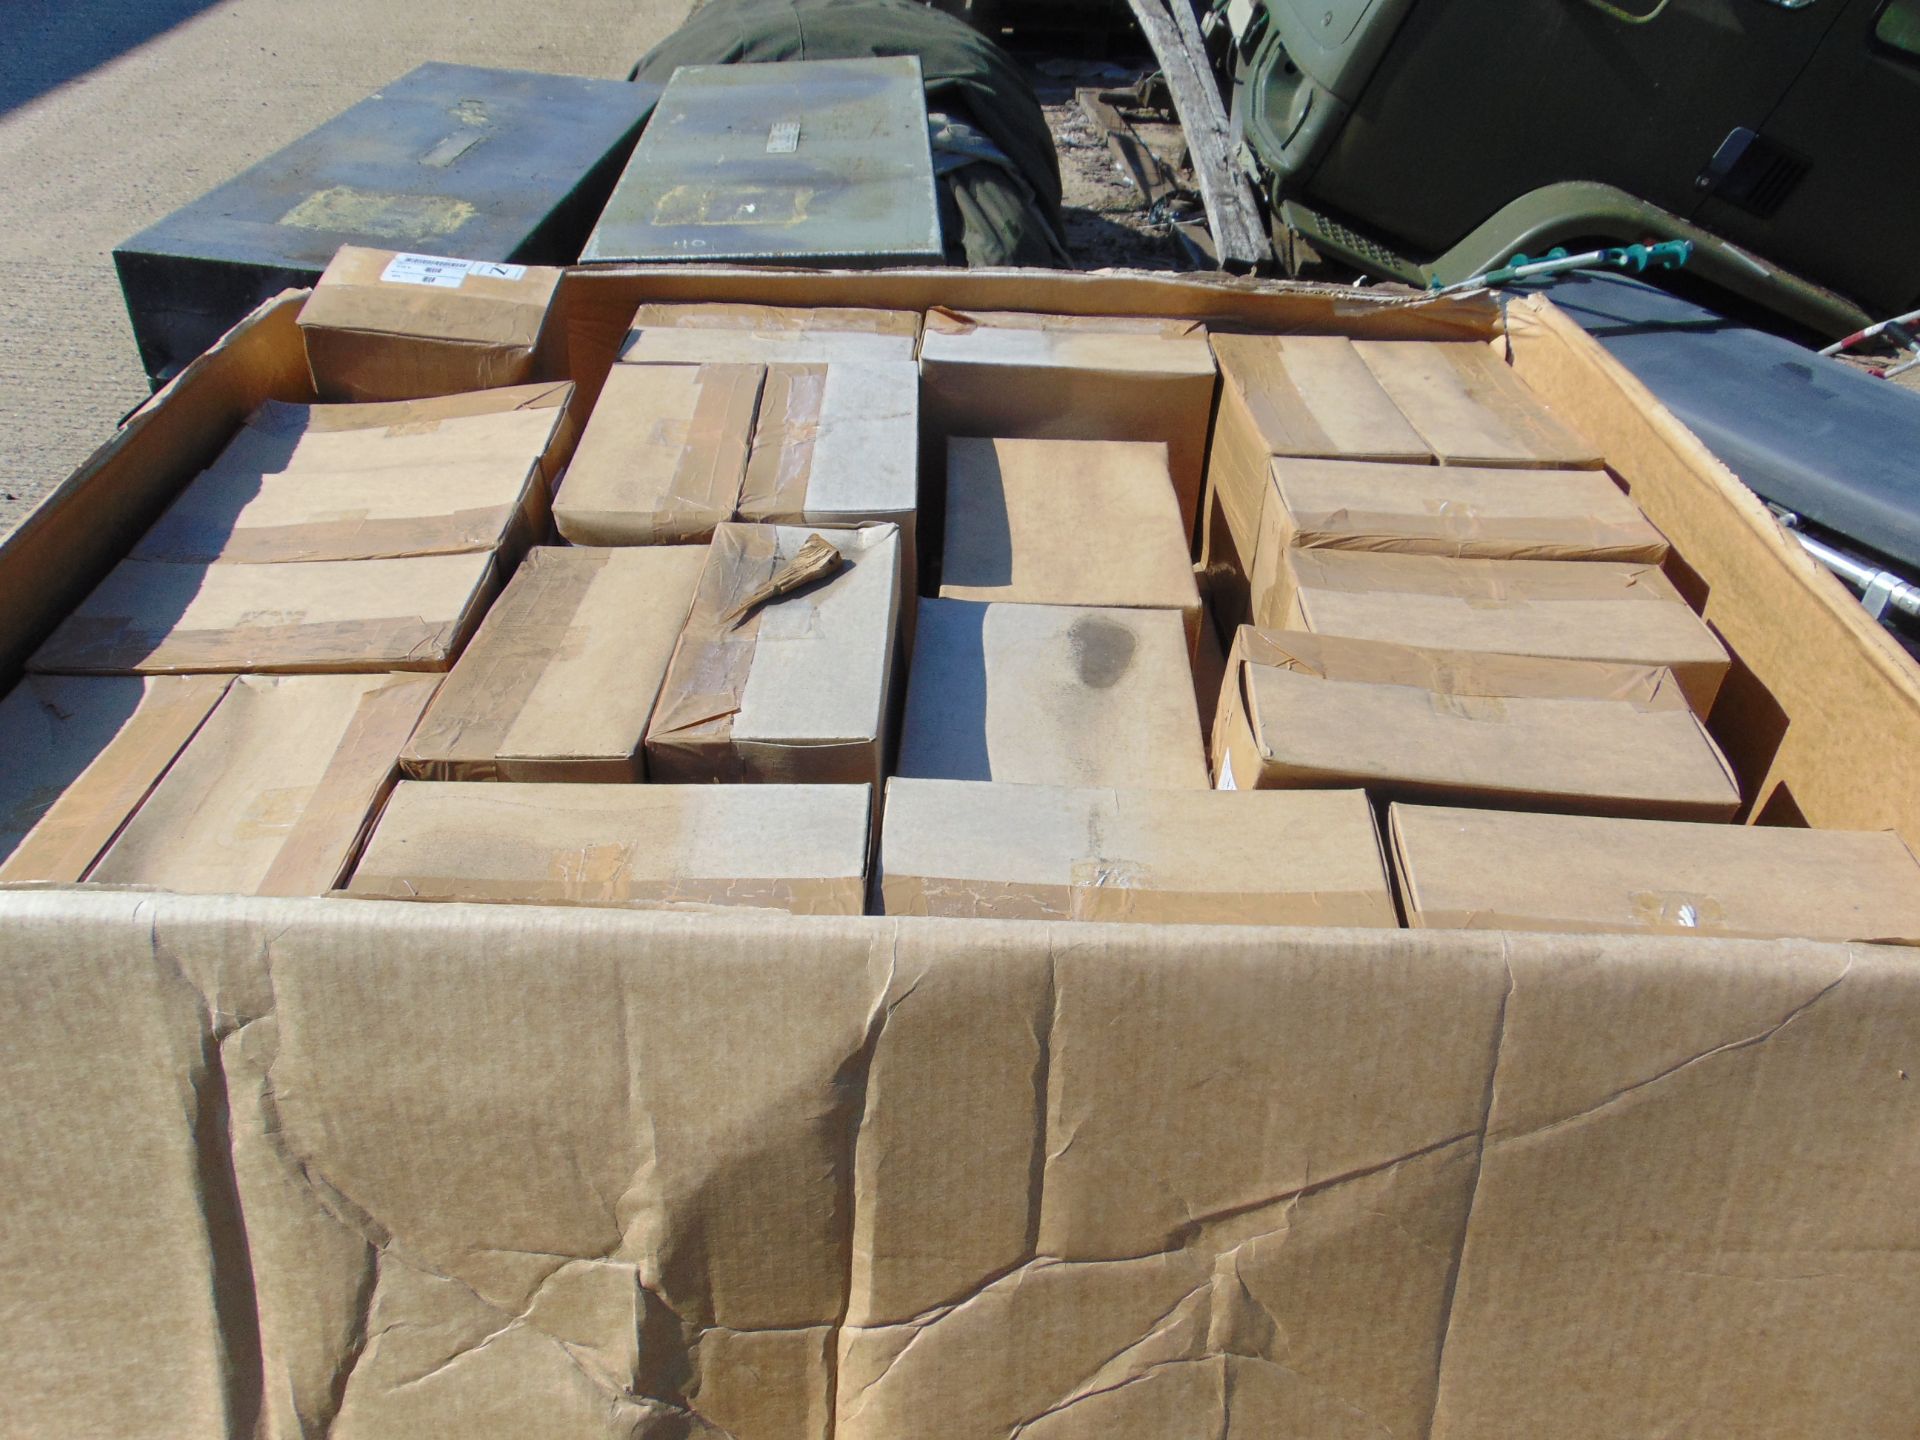 Box of AFV Vehicle Spares - Image 2 of 2